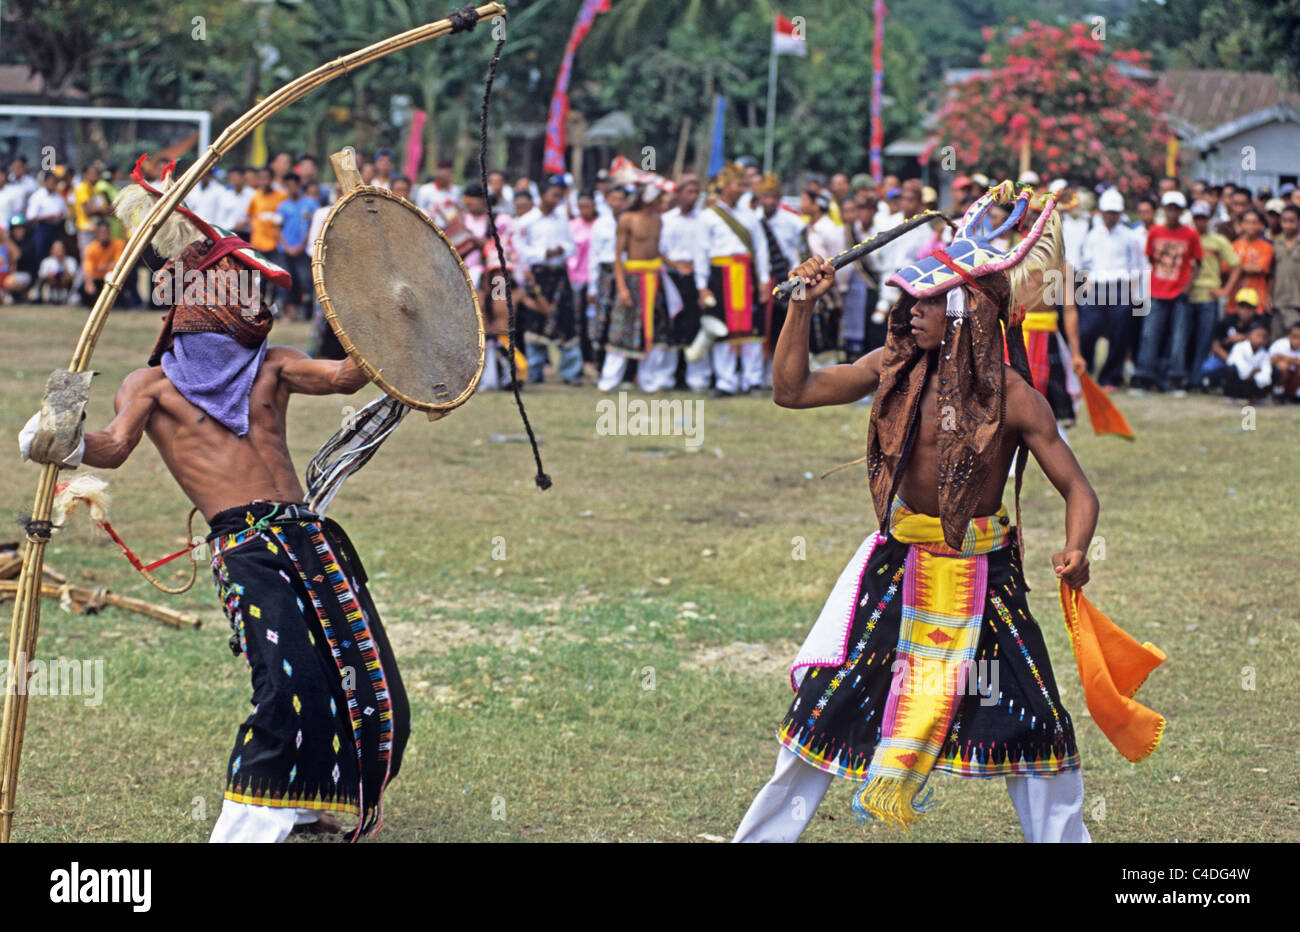 Caci whip fighting,Flores,Indonesia Stock Photo